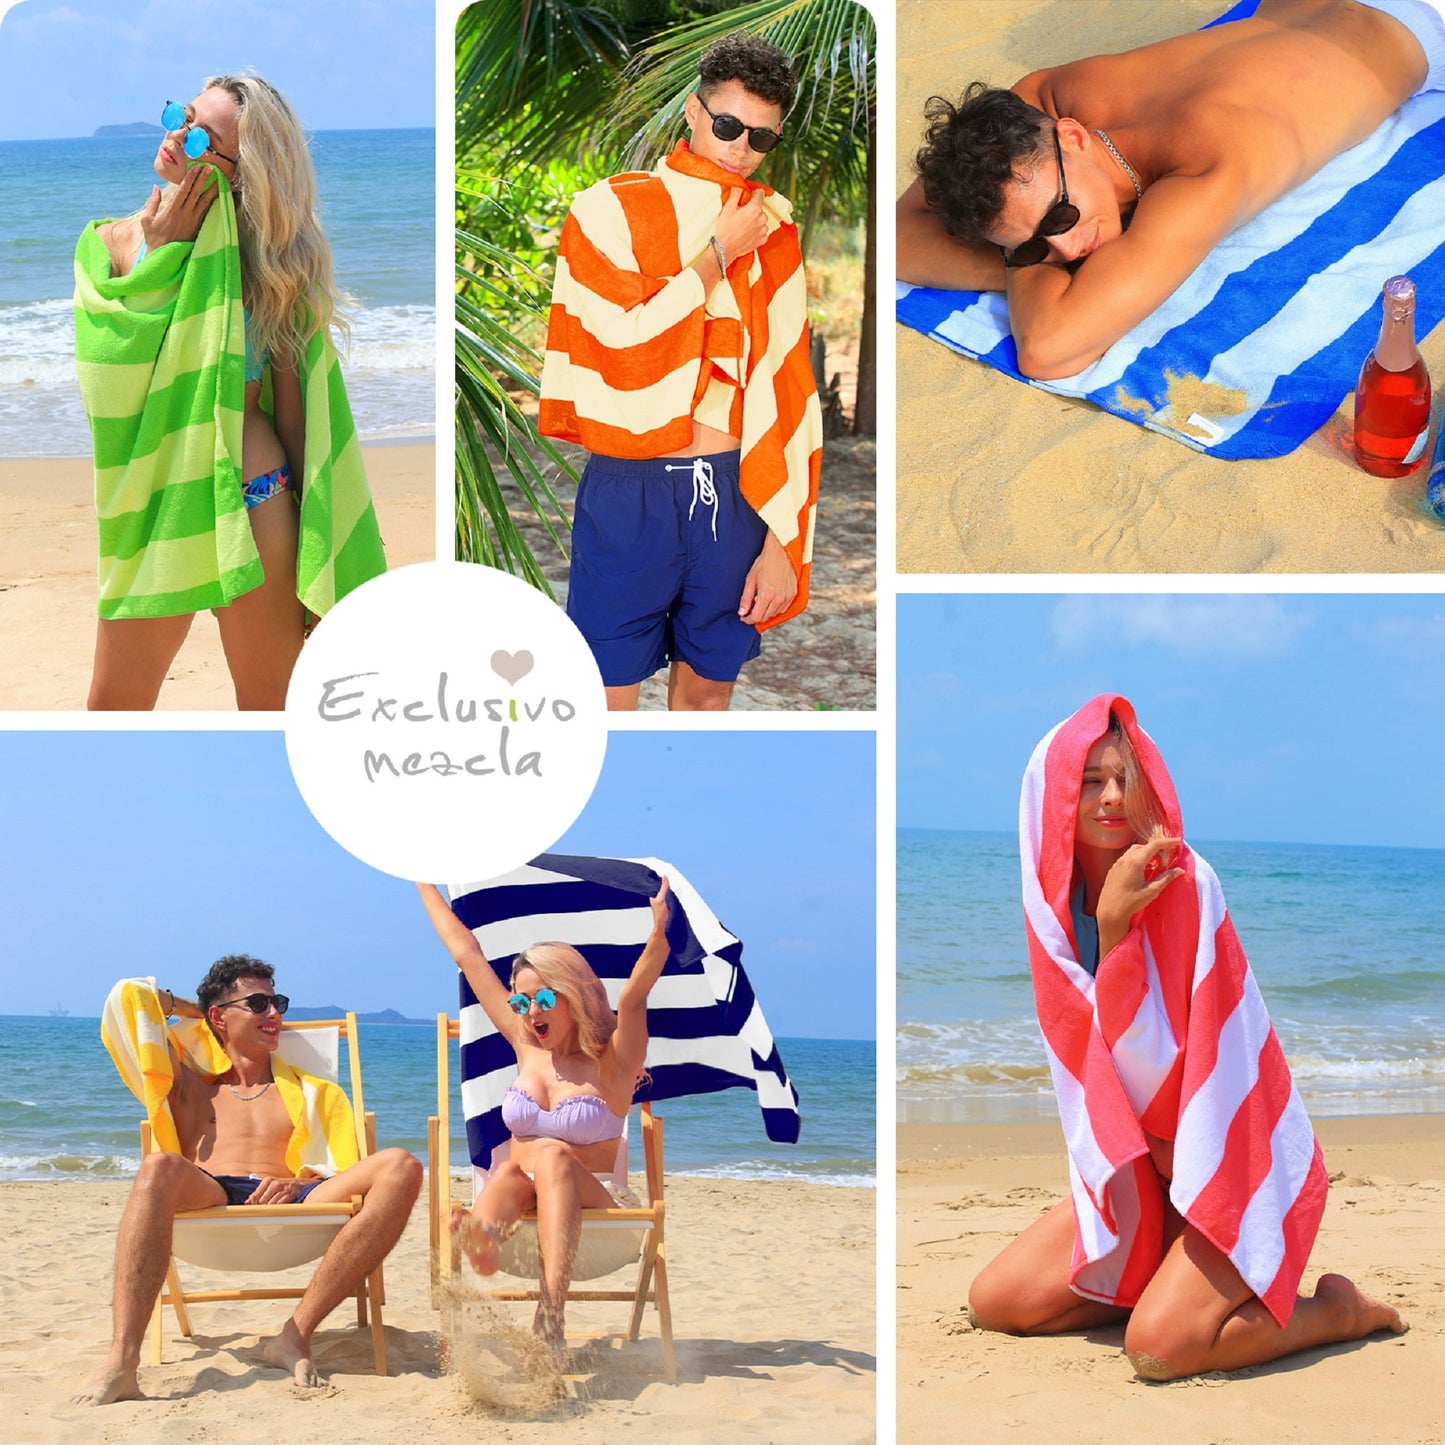 Exclusivo Mezcla Microfiber Cabana Striped Large Beach Towel for Adults (Light Green, 30" x 60")-Soft, Quick Dry, Absorbent, and Plush